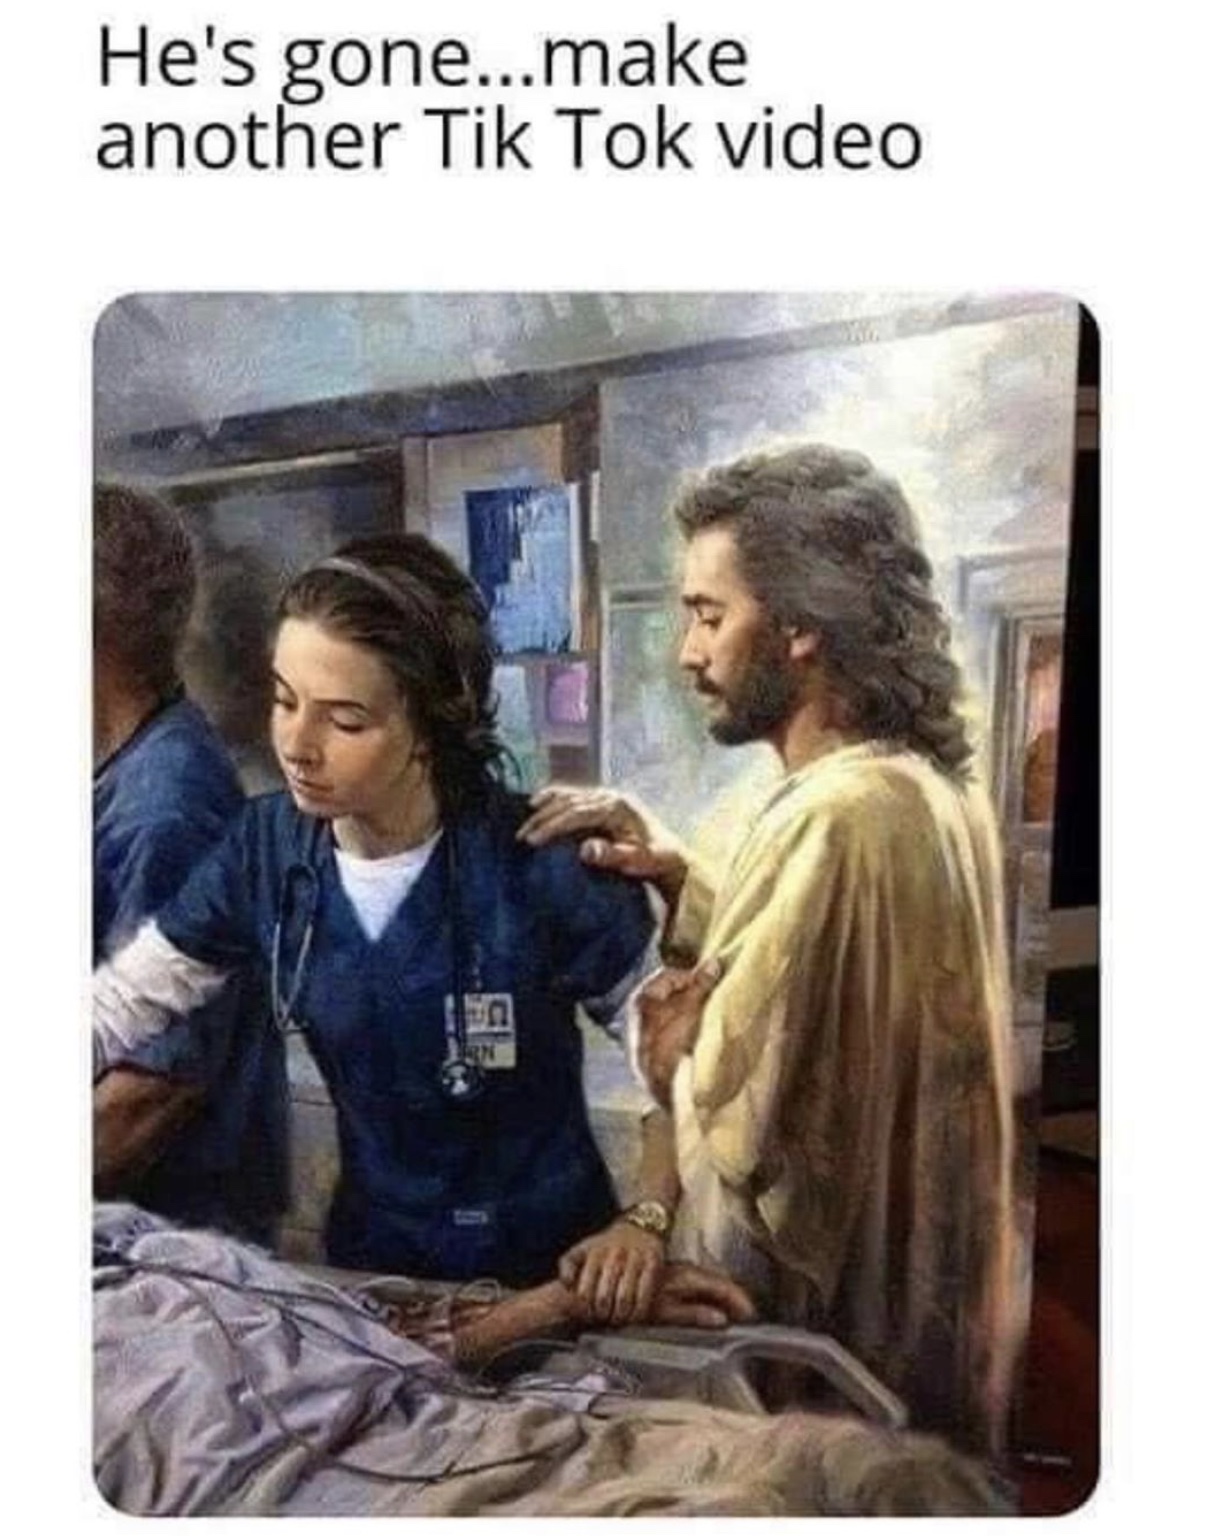 jesus at work - He's gone...make another Tik Tok video